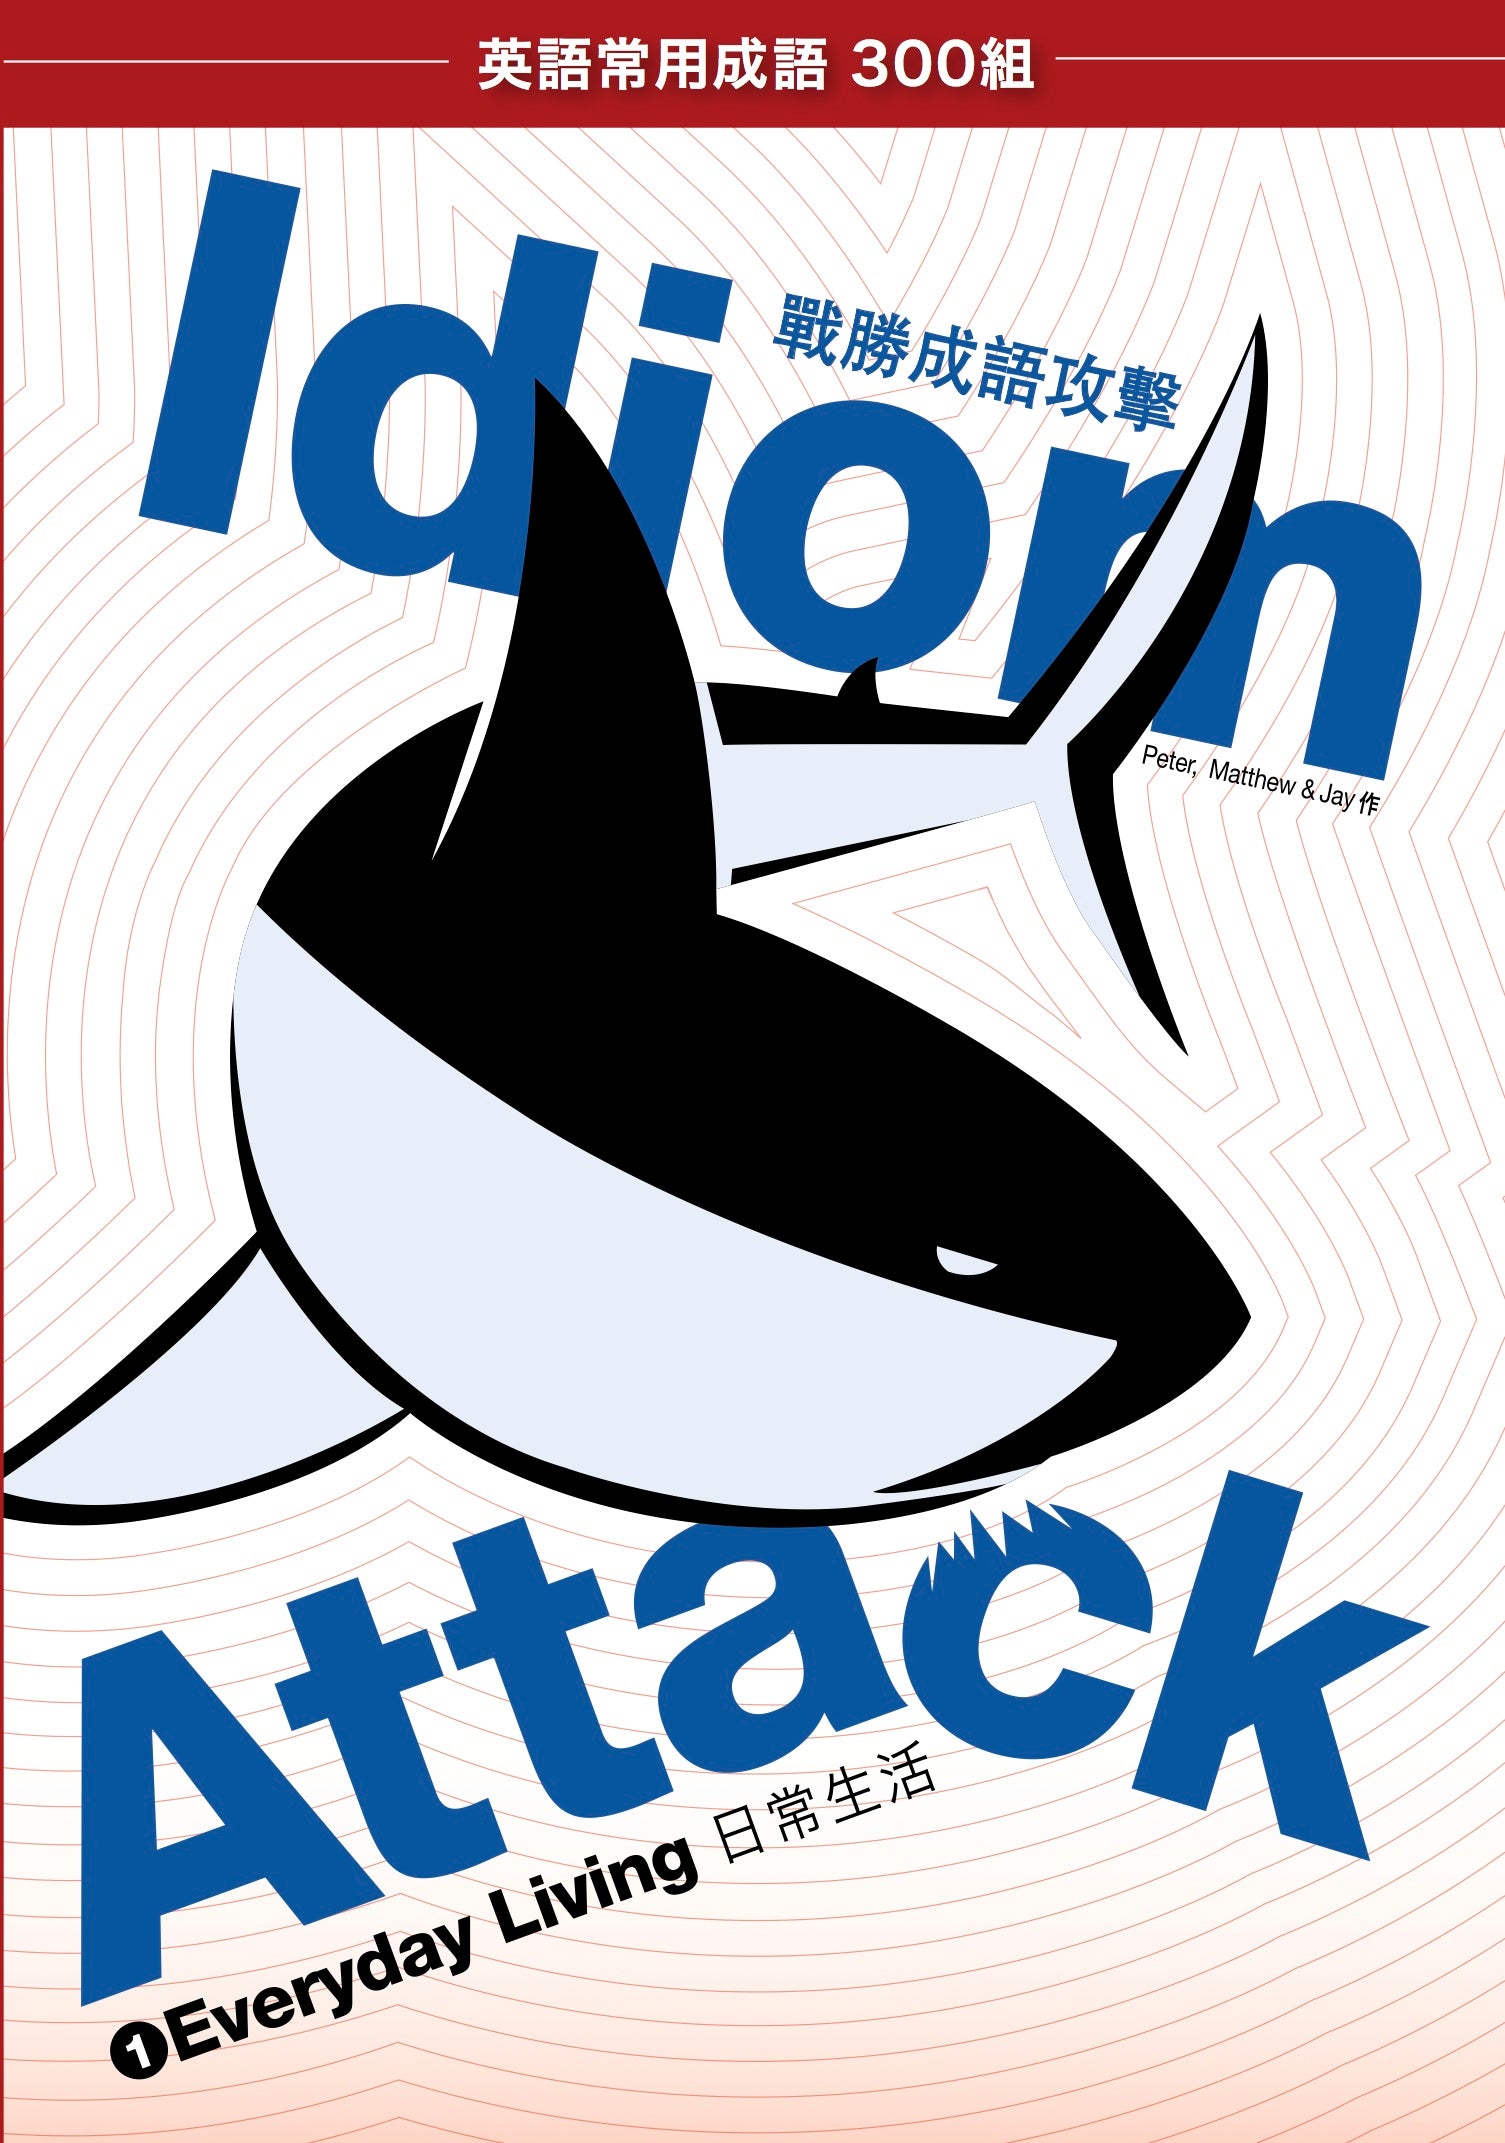 Idiom Attack Vol. 1 - Everyday Living (Trad. Chinese Edition) : 成語攻擊 1 - 日常生活 : English Idioms for ESL Learners: With 300+ Idioms in 25 Themed Chapters w/ free MP3 at IdiomAttack.com